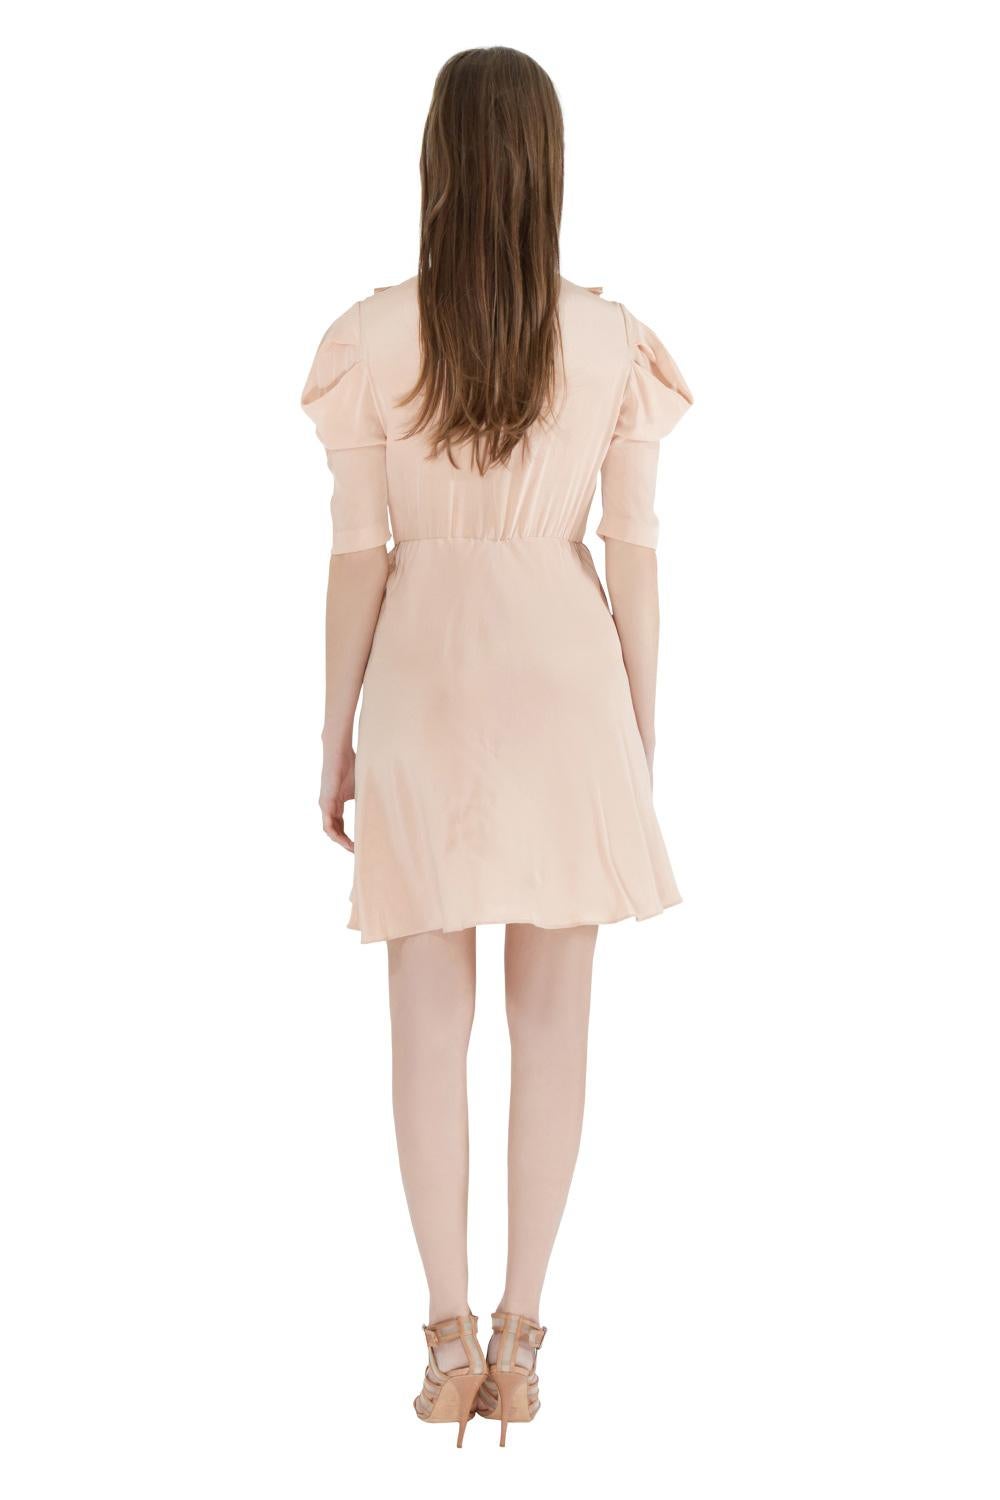 Super feminine and pretty, this Miu Miu dress will definitely fetch you lots of compliments. The lovely ruffle trims, lace inserts at the front and subtly pleated sleeves make this dress a woman's dream. Team it with strappy sandals for your dinner